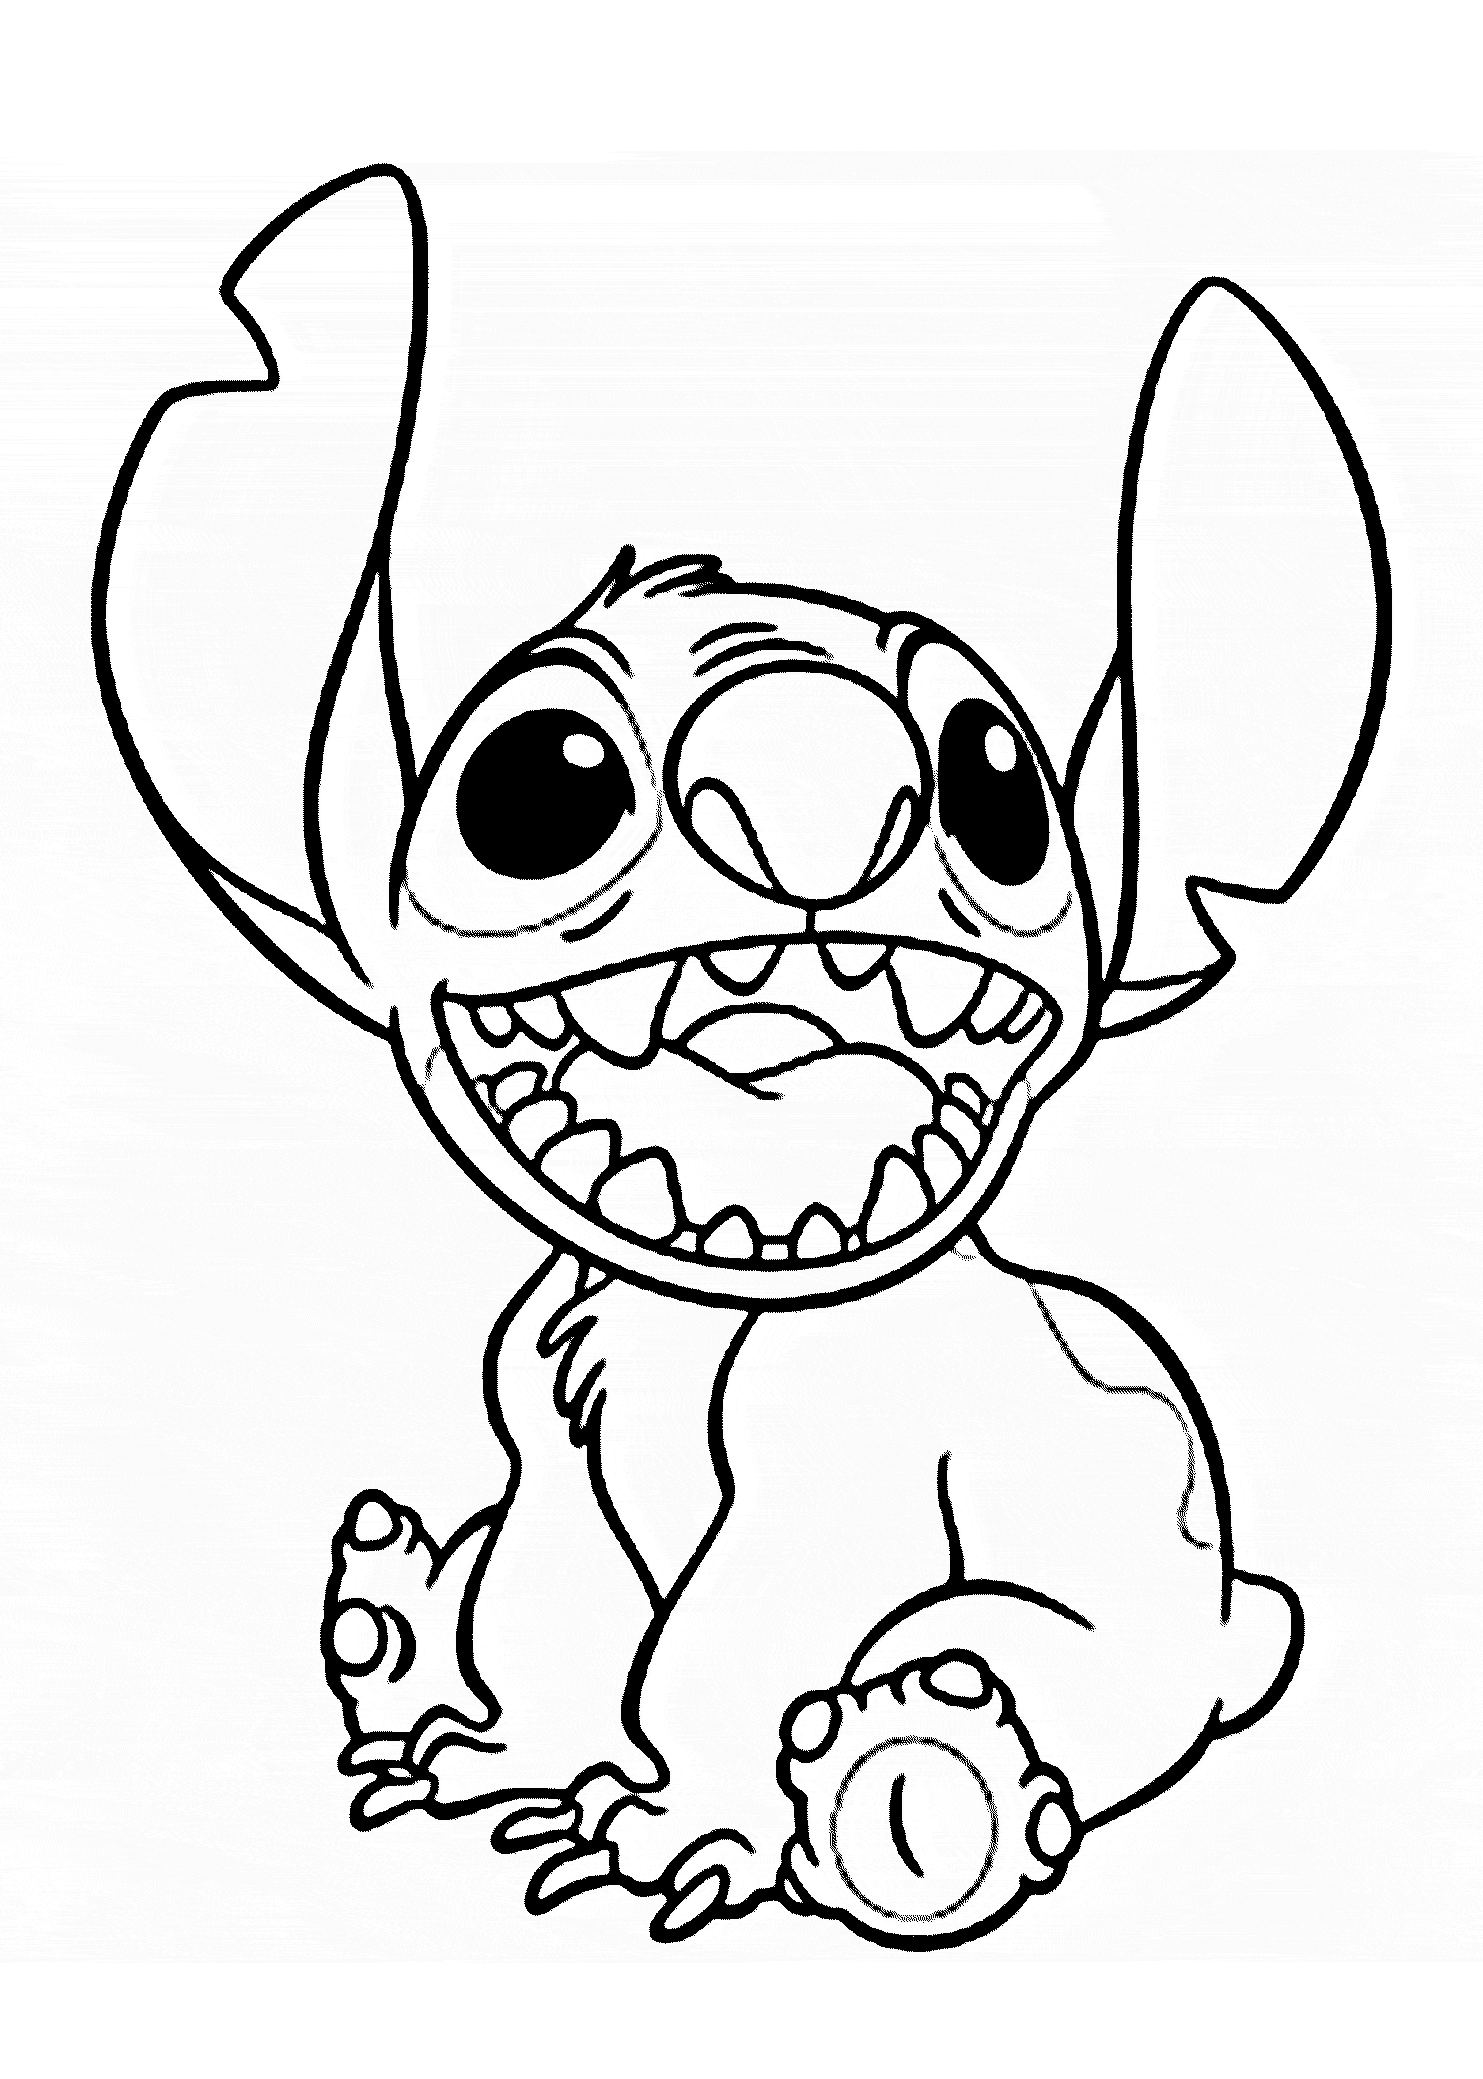 lilo-and-stitch-coloring-pages-to-download-and-print-for-free